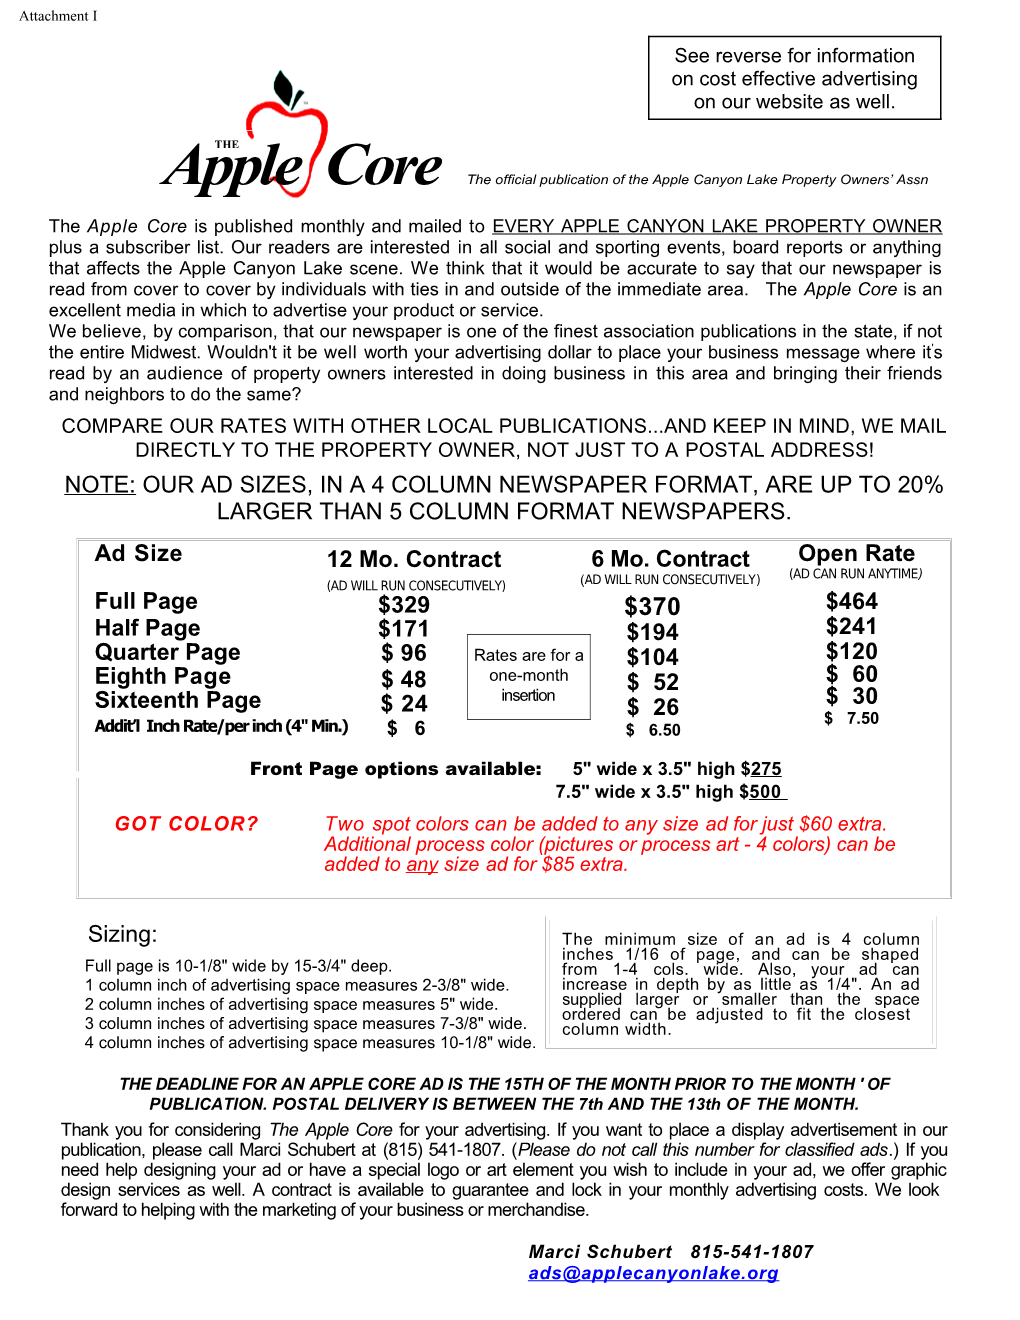 Apple Core the Official Publication of the Apple Canyon Lake Property Owners Assn